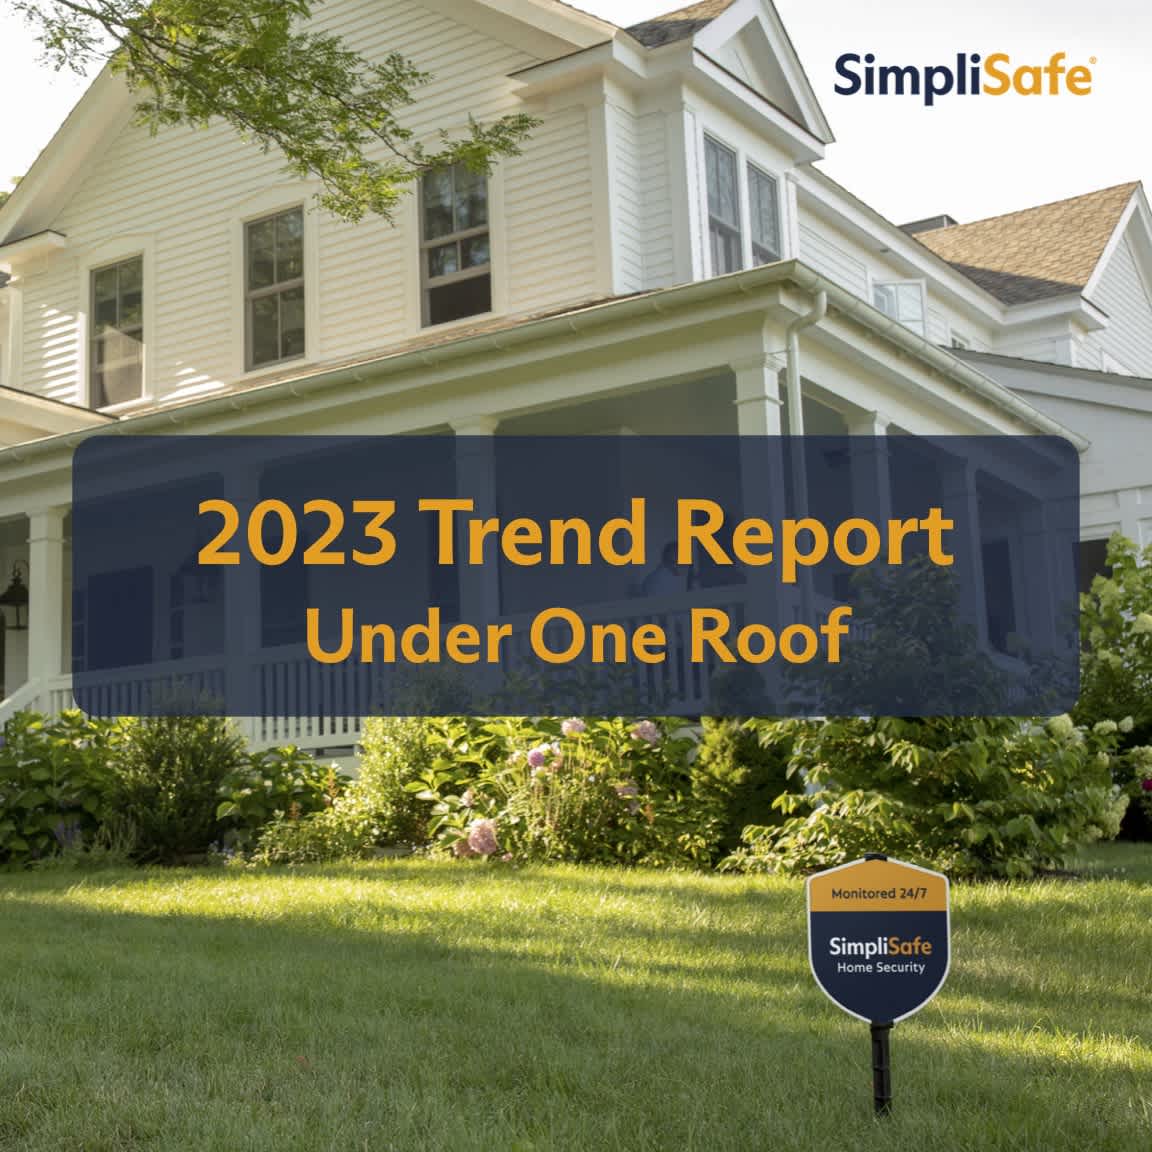 SimpliSafe® Launches Breakthrough 24/7 Live Guard Protection Feature to  Help Deter Crime